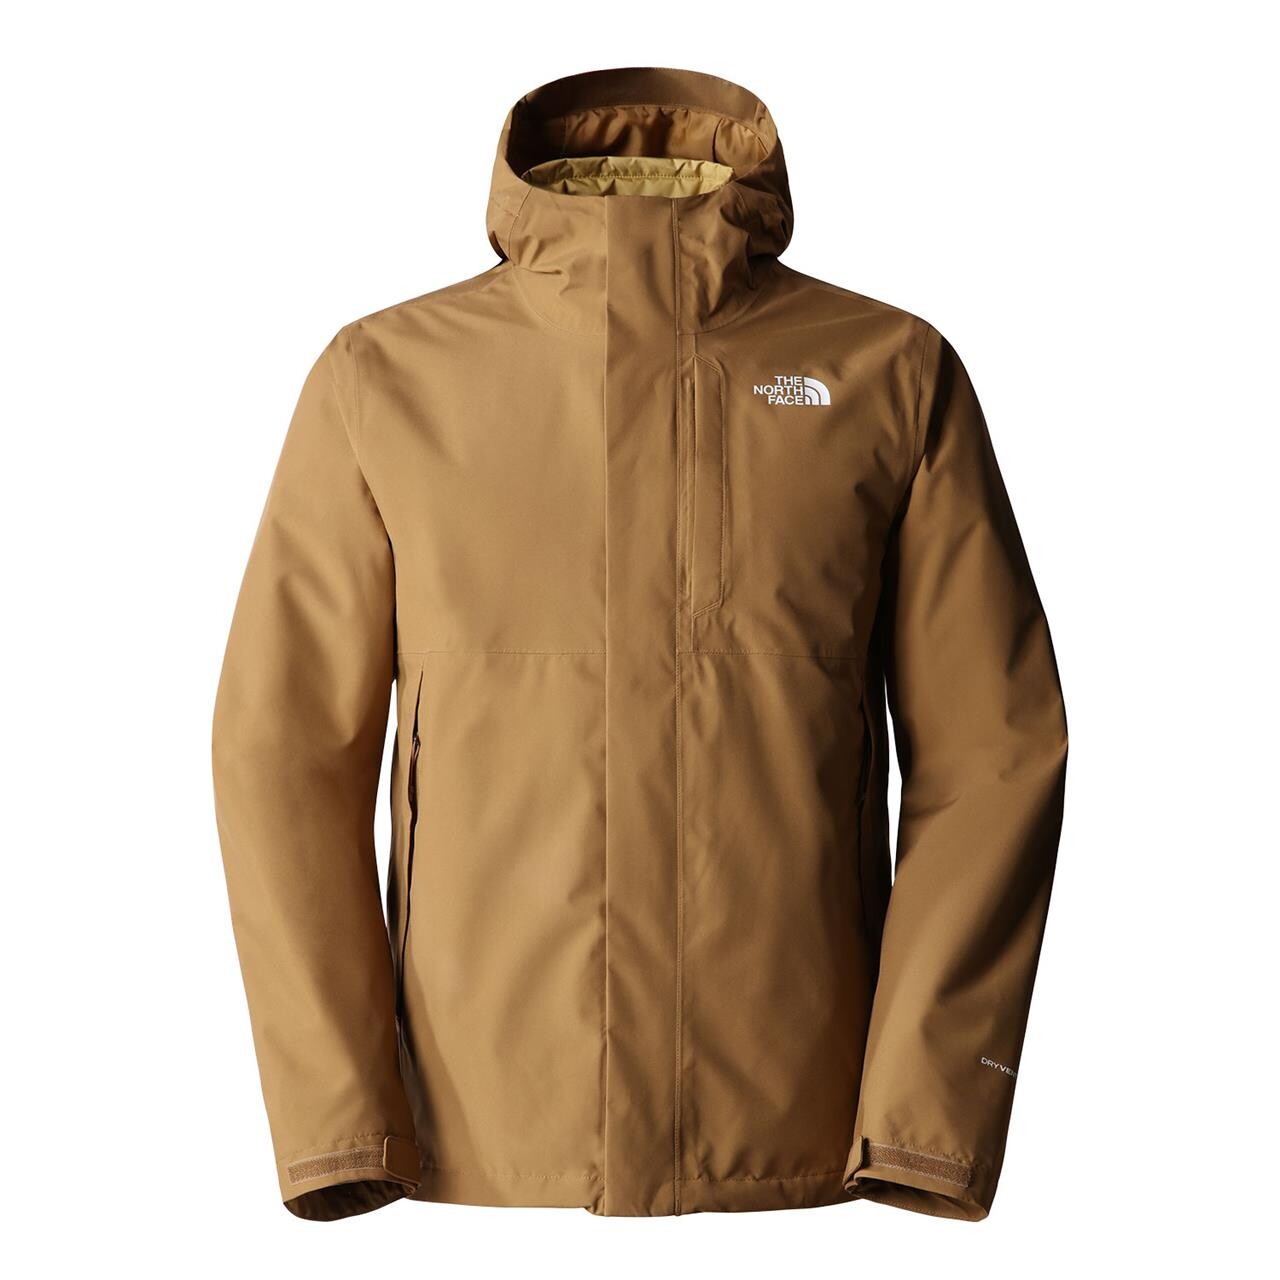 symbool Christian Vernederen The North Face Carto Triclimate-jas voor heren (BRUIN (UTILITY  BROWN/ANTELOPE TAN) Small (S)) – Caminoking.dk